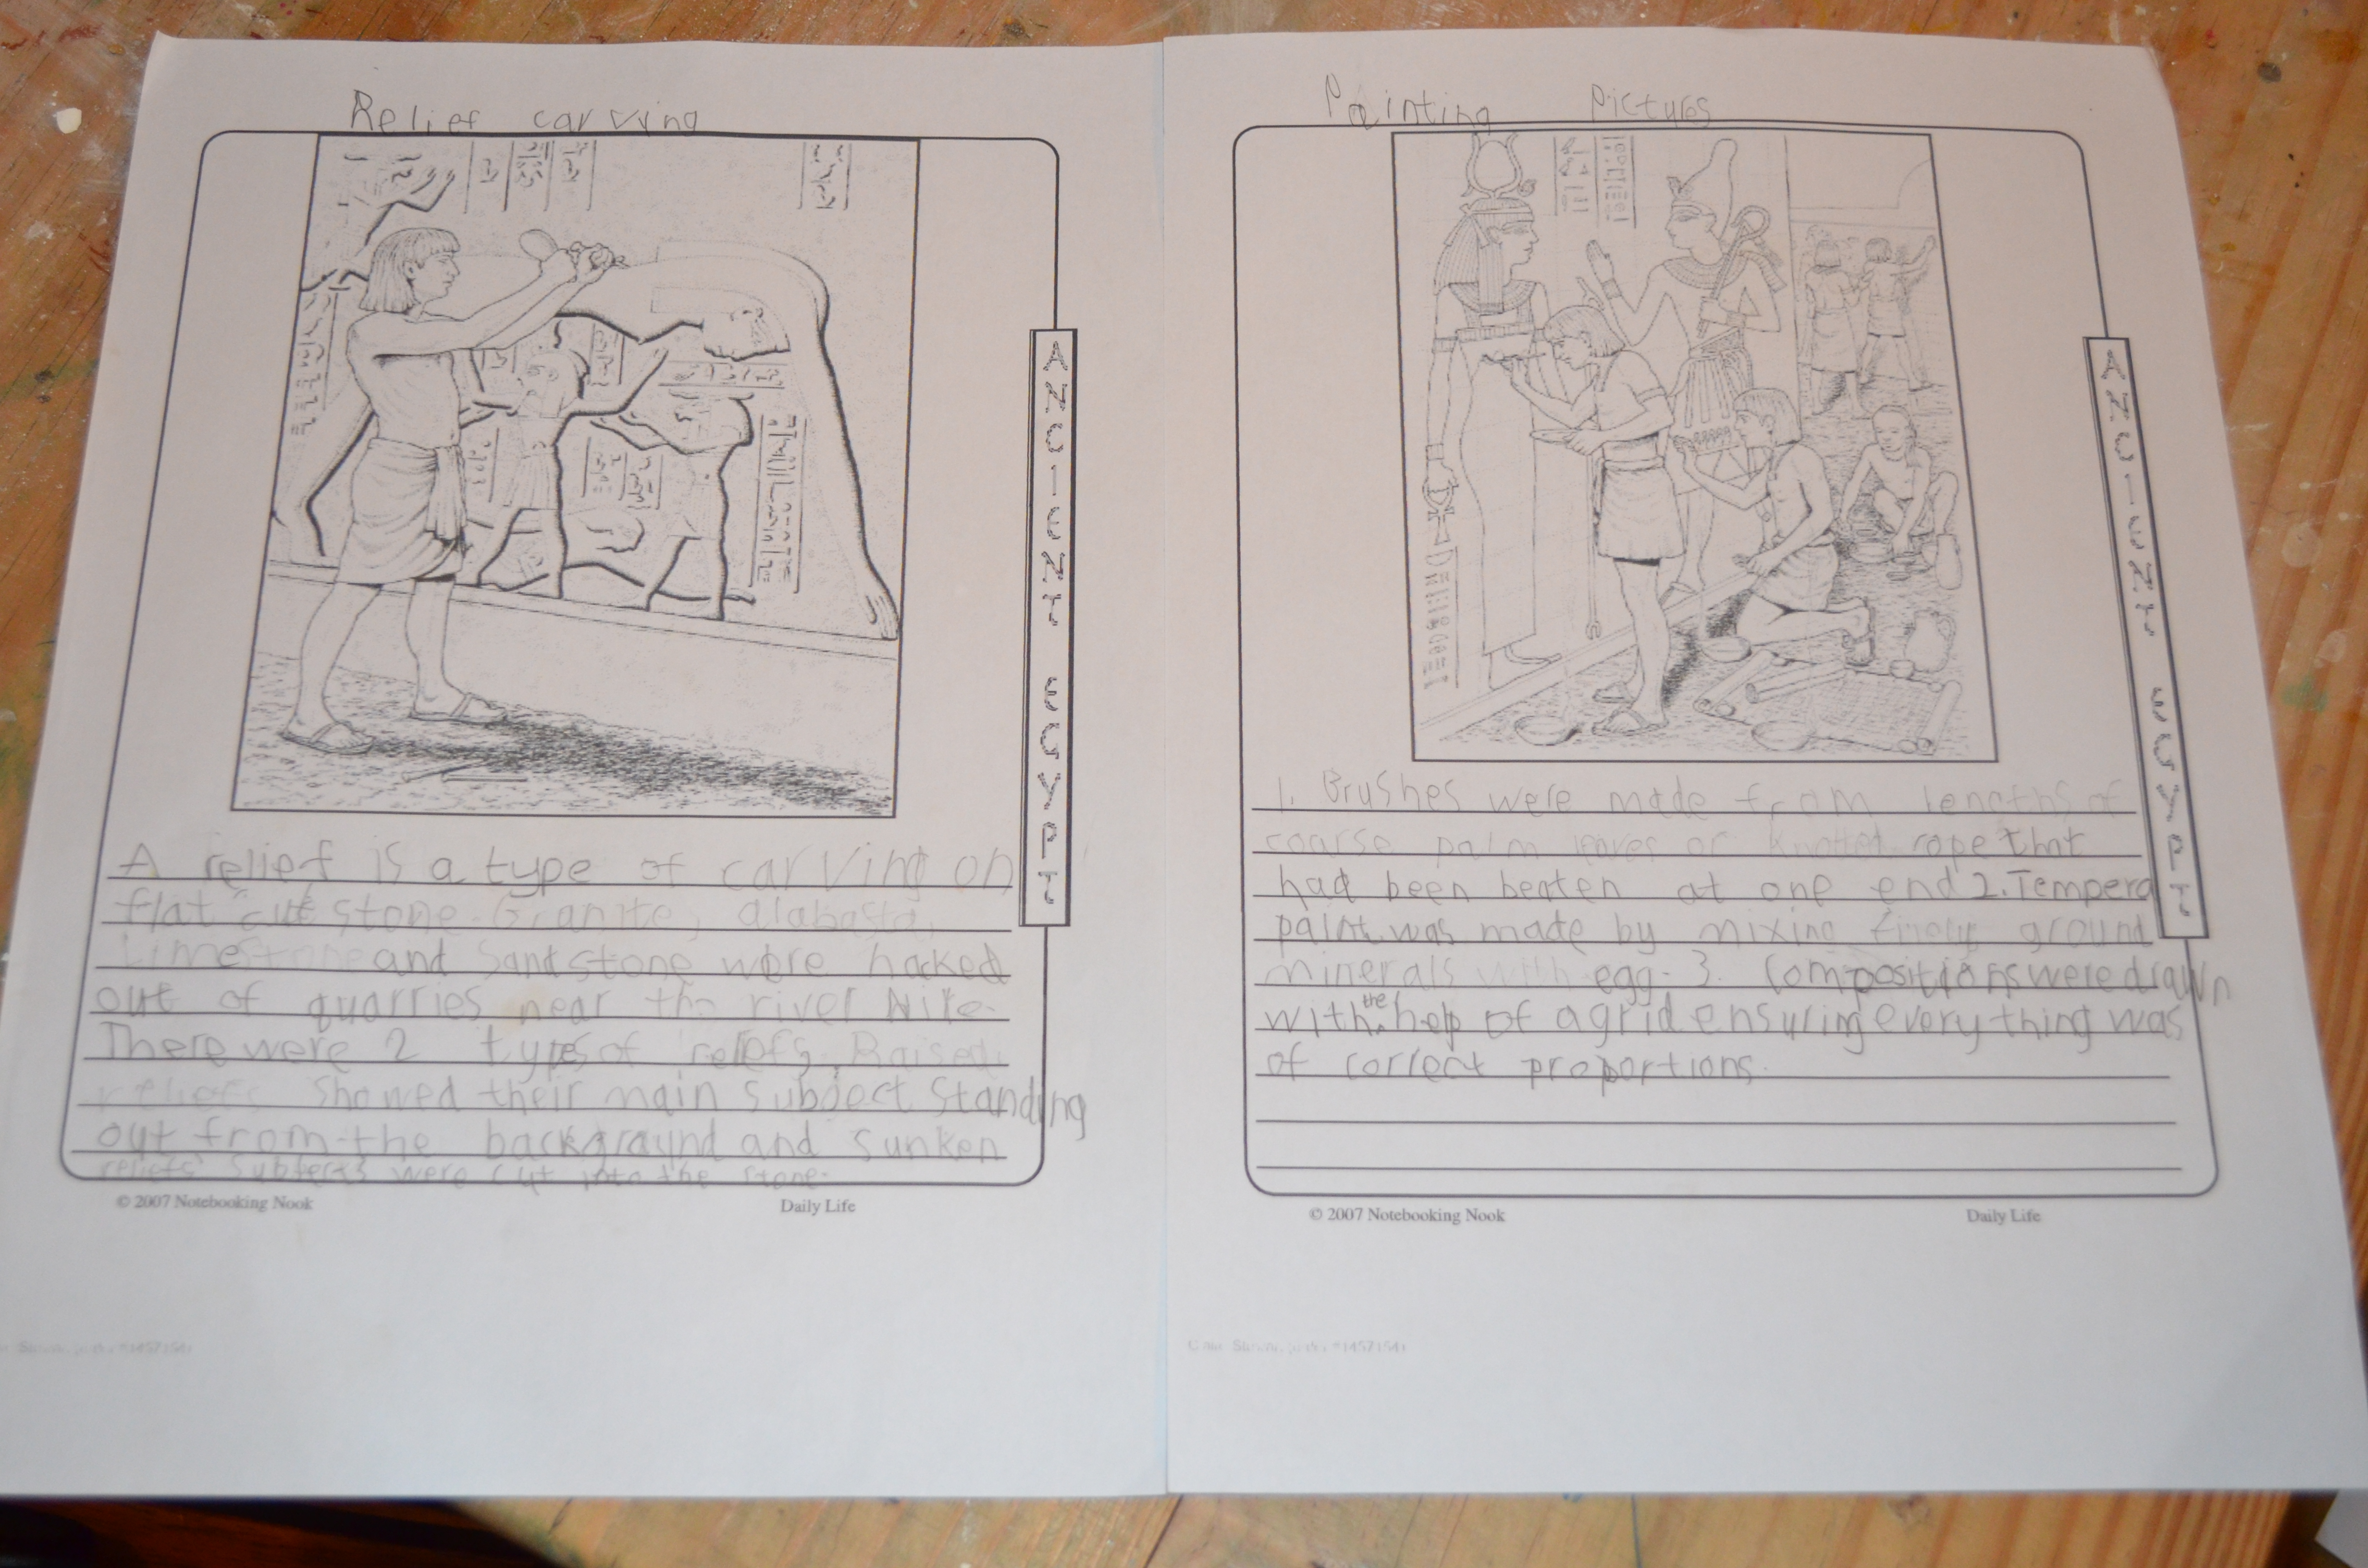 Notepages about reliefs and painting